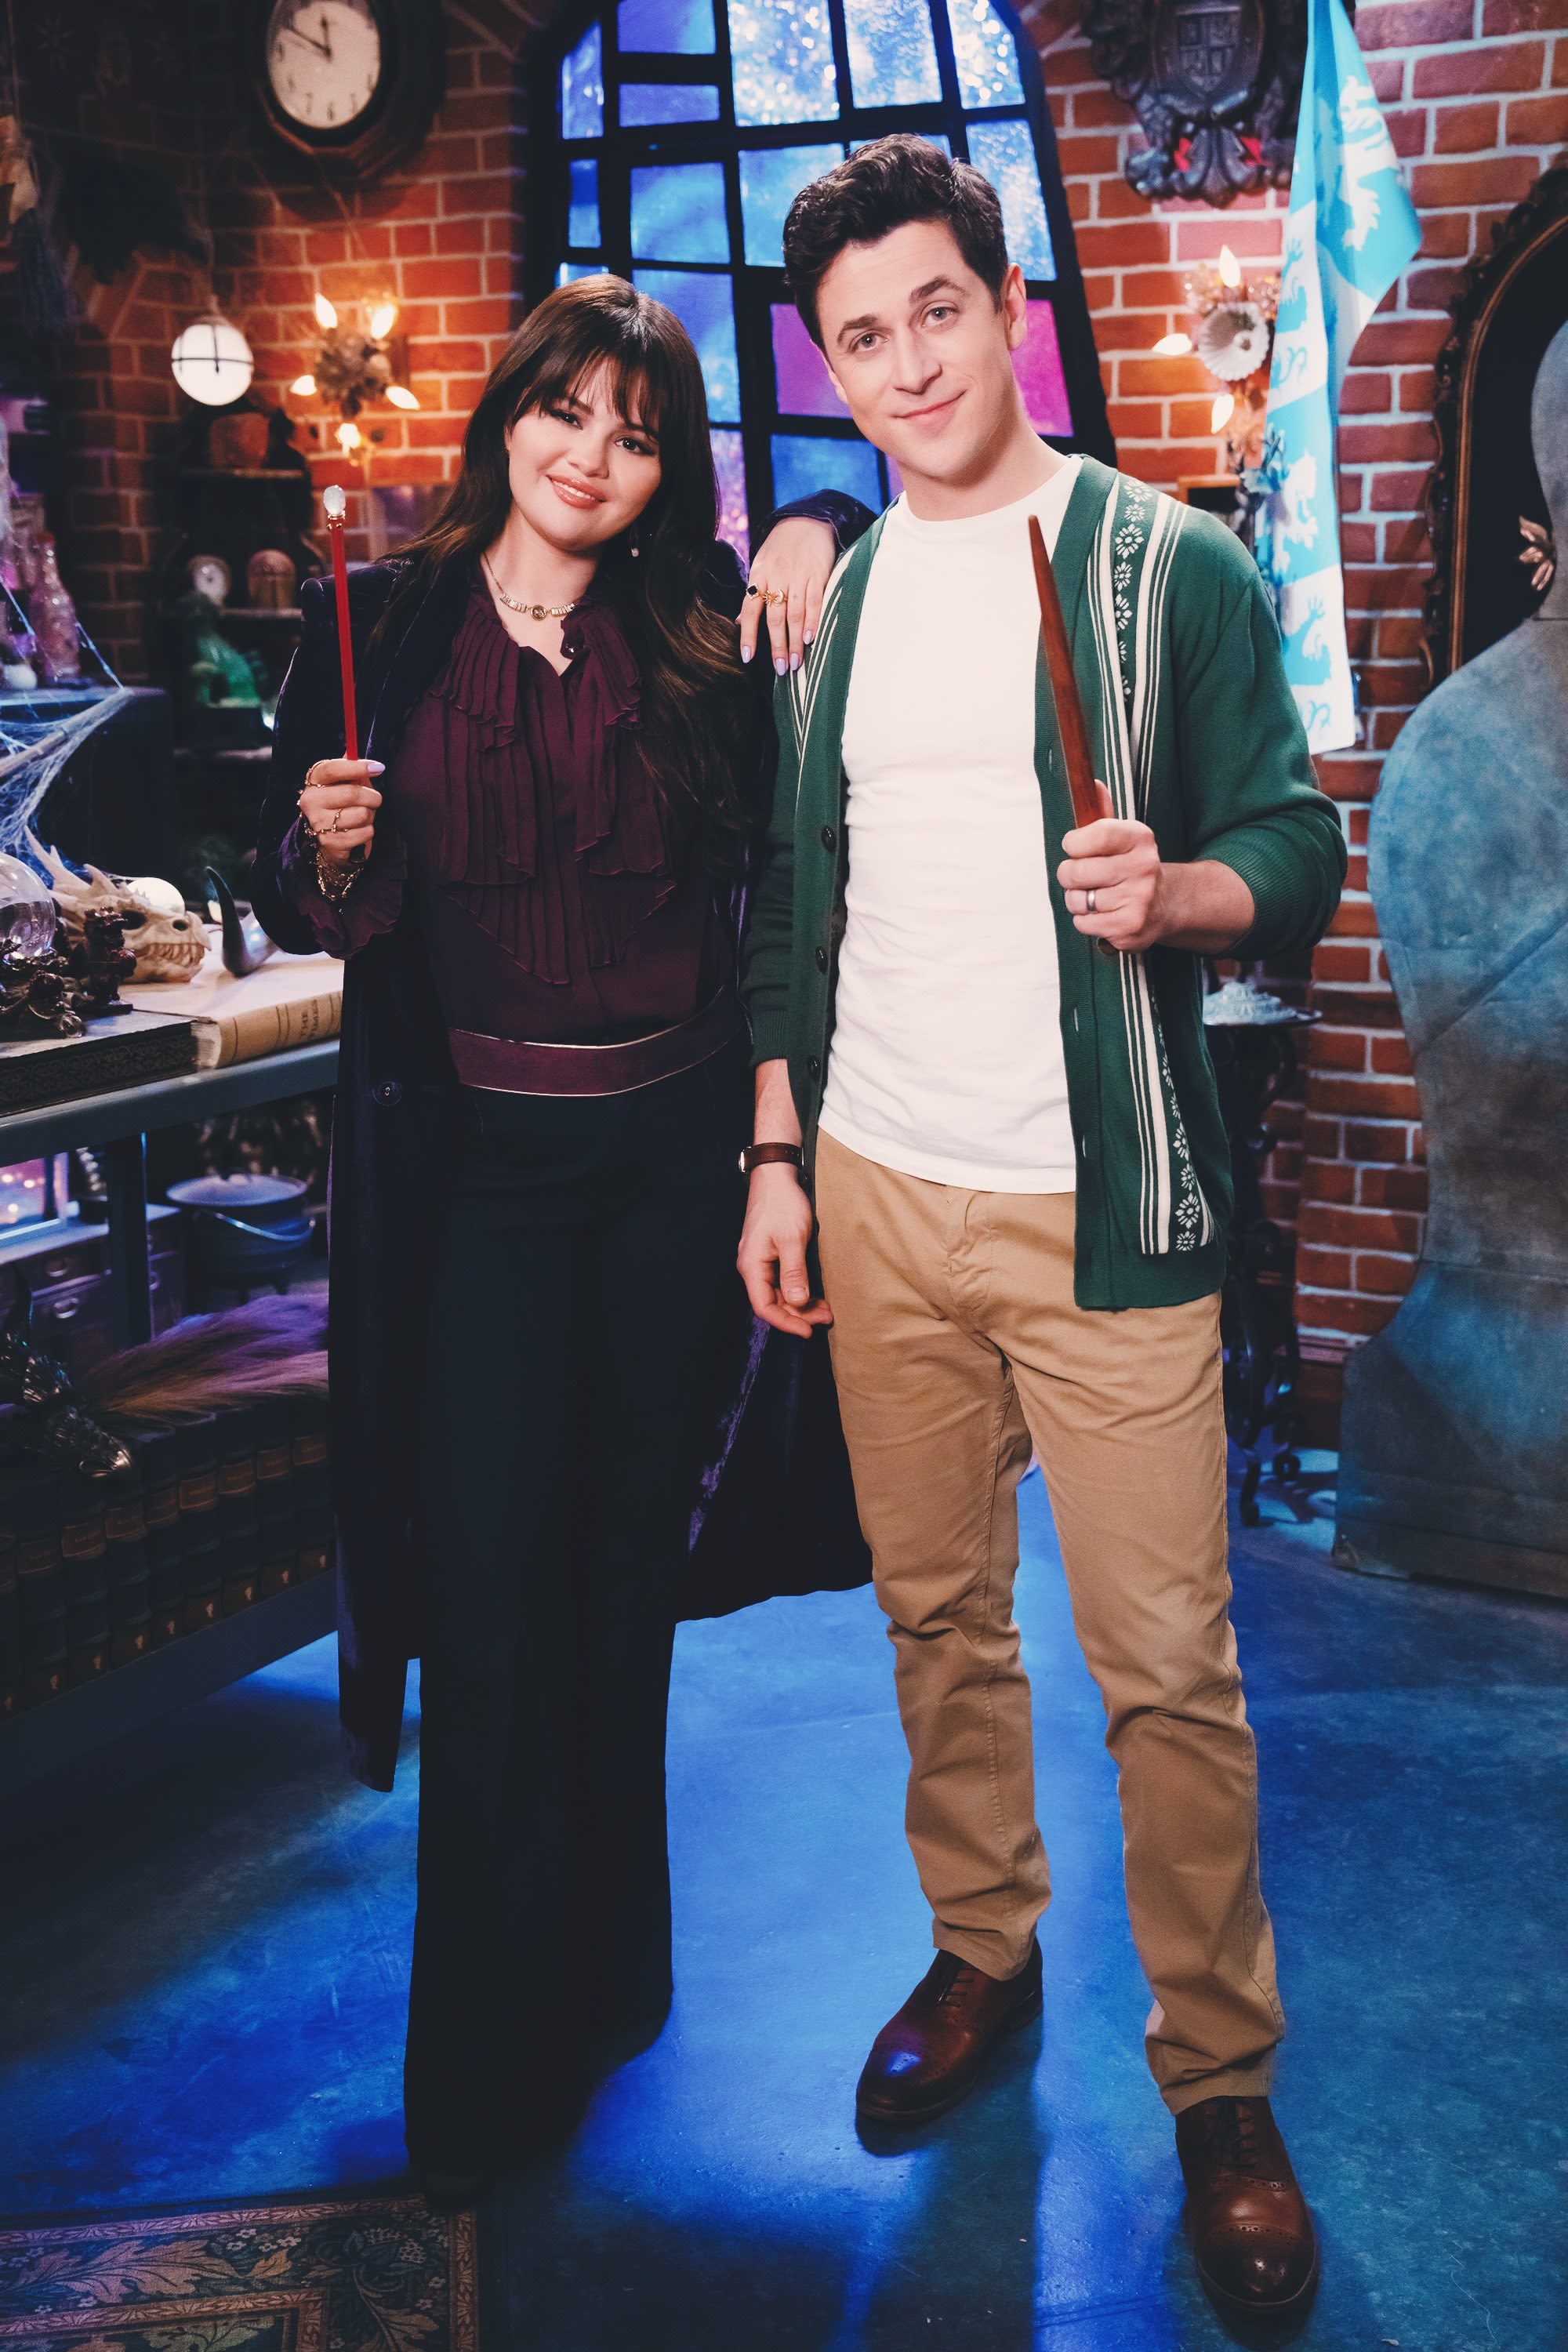 Selena Gomez Reveals New Title for Wizards of Waverly Place Spinoff, Shares First Look Photos